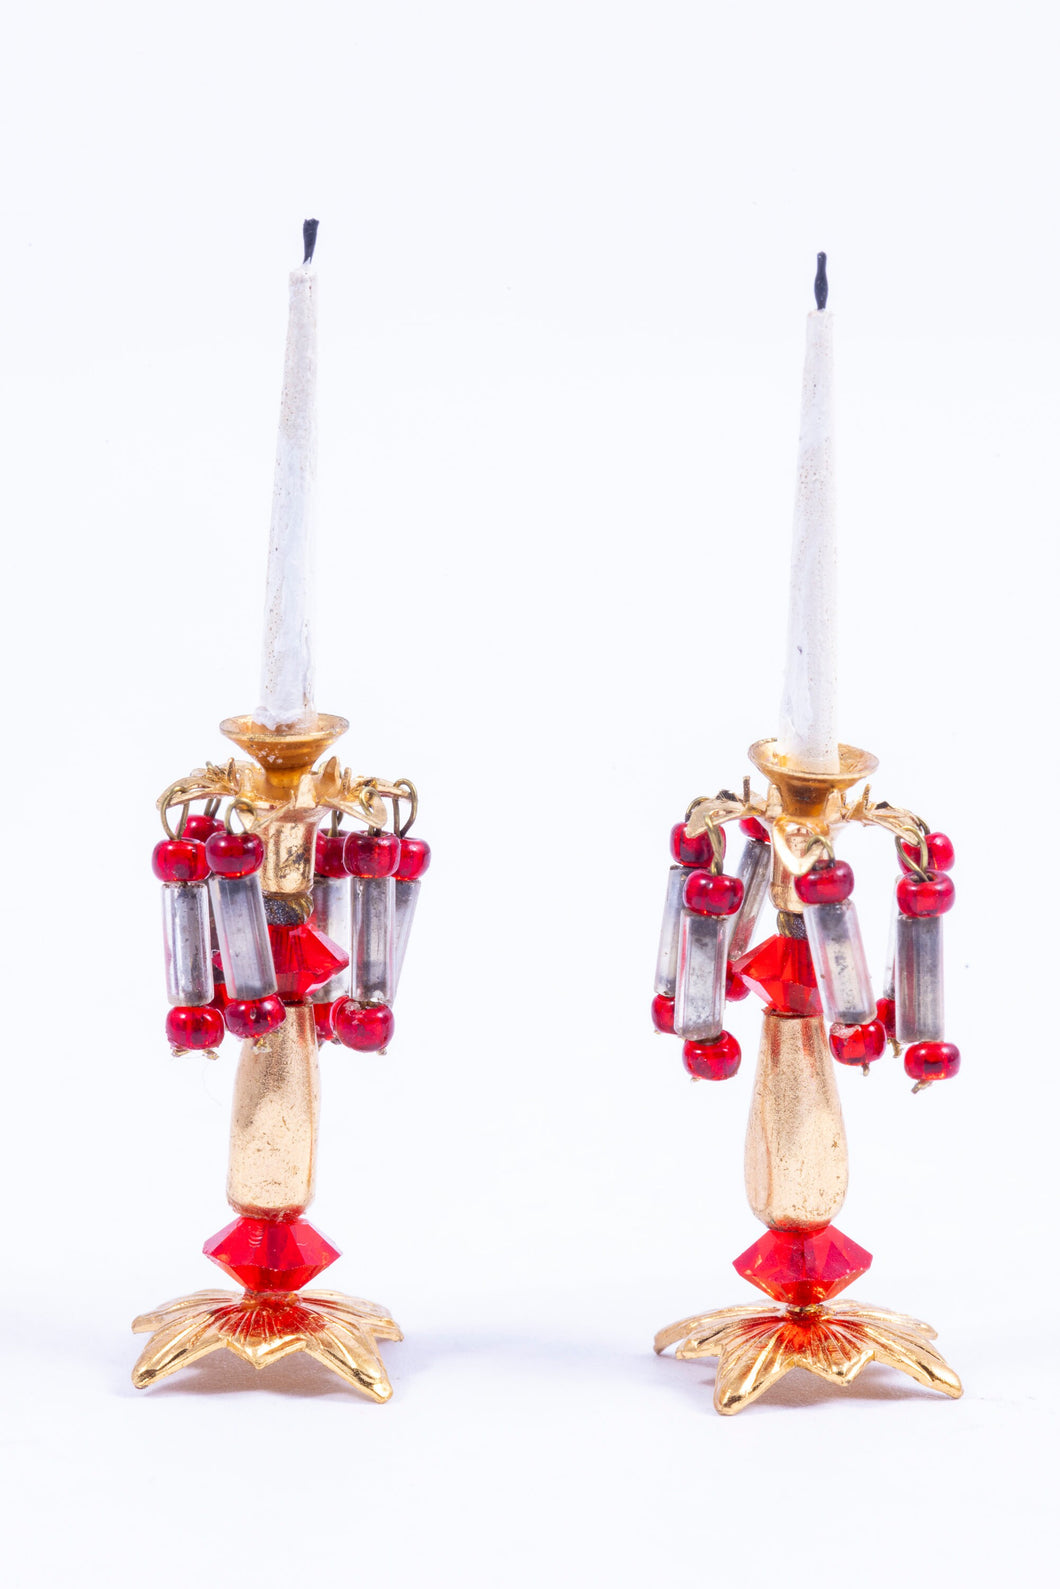 Pair of Candlesticks with Red Crystals